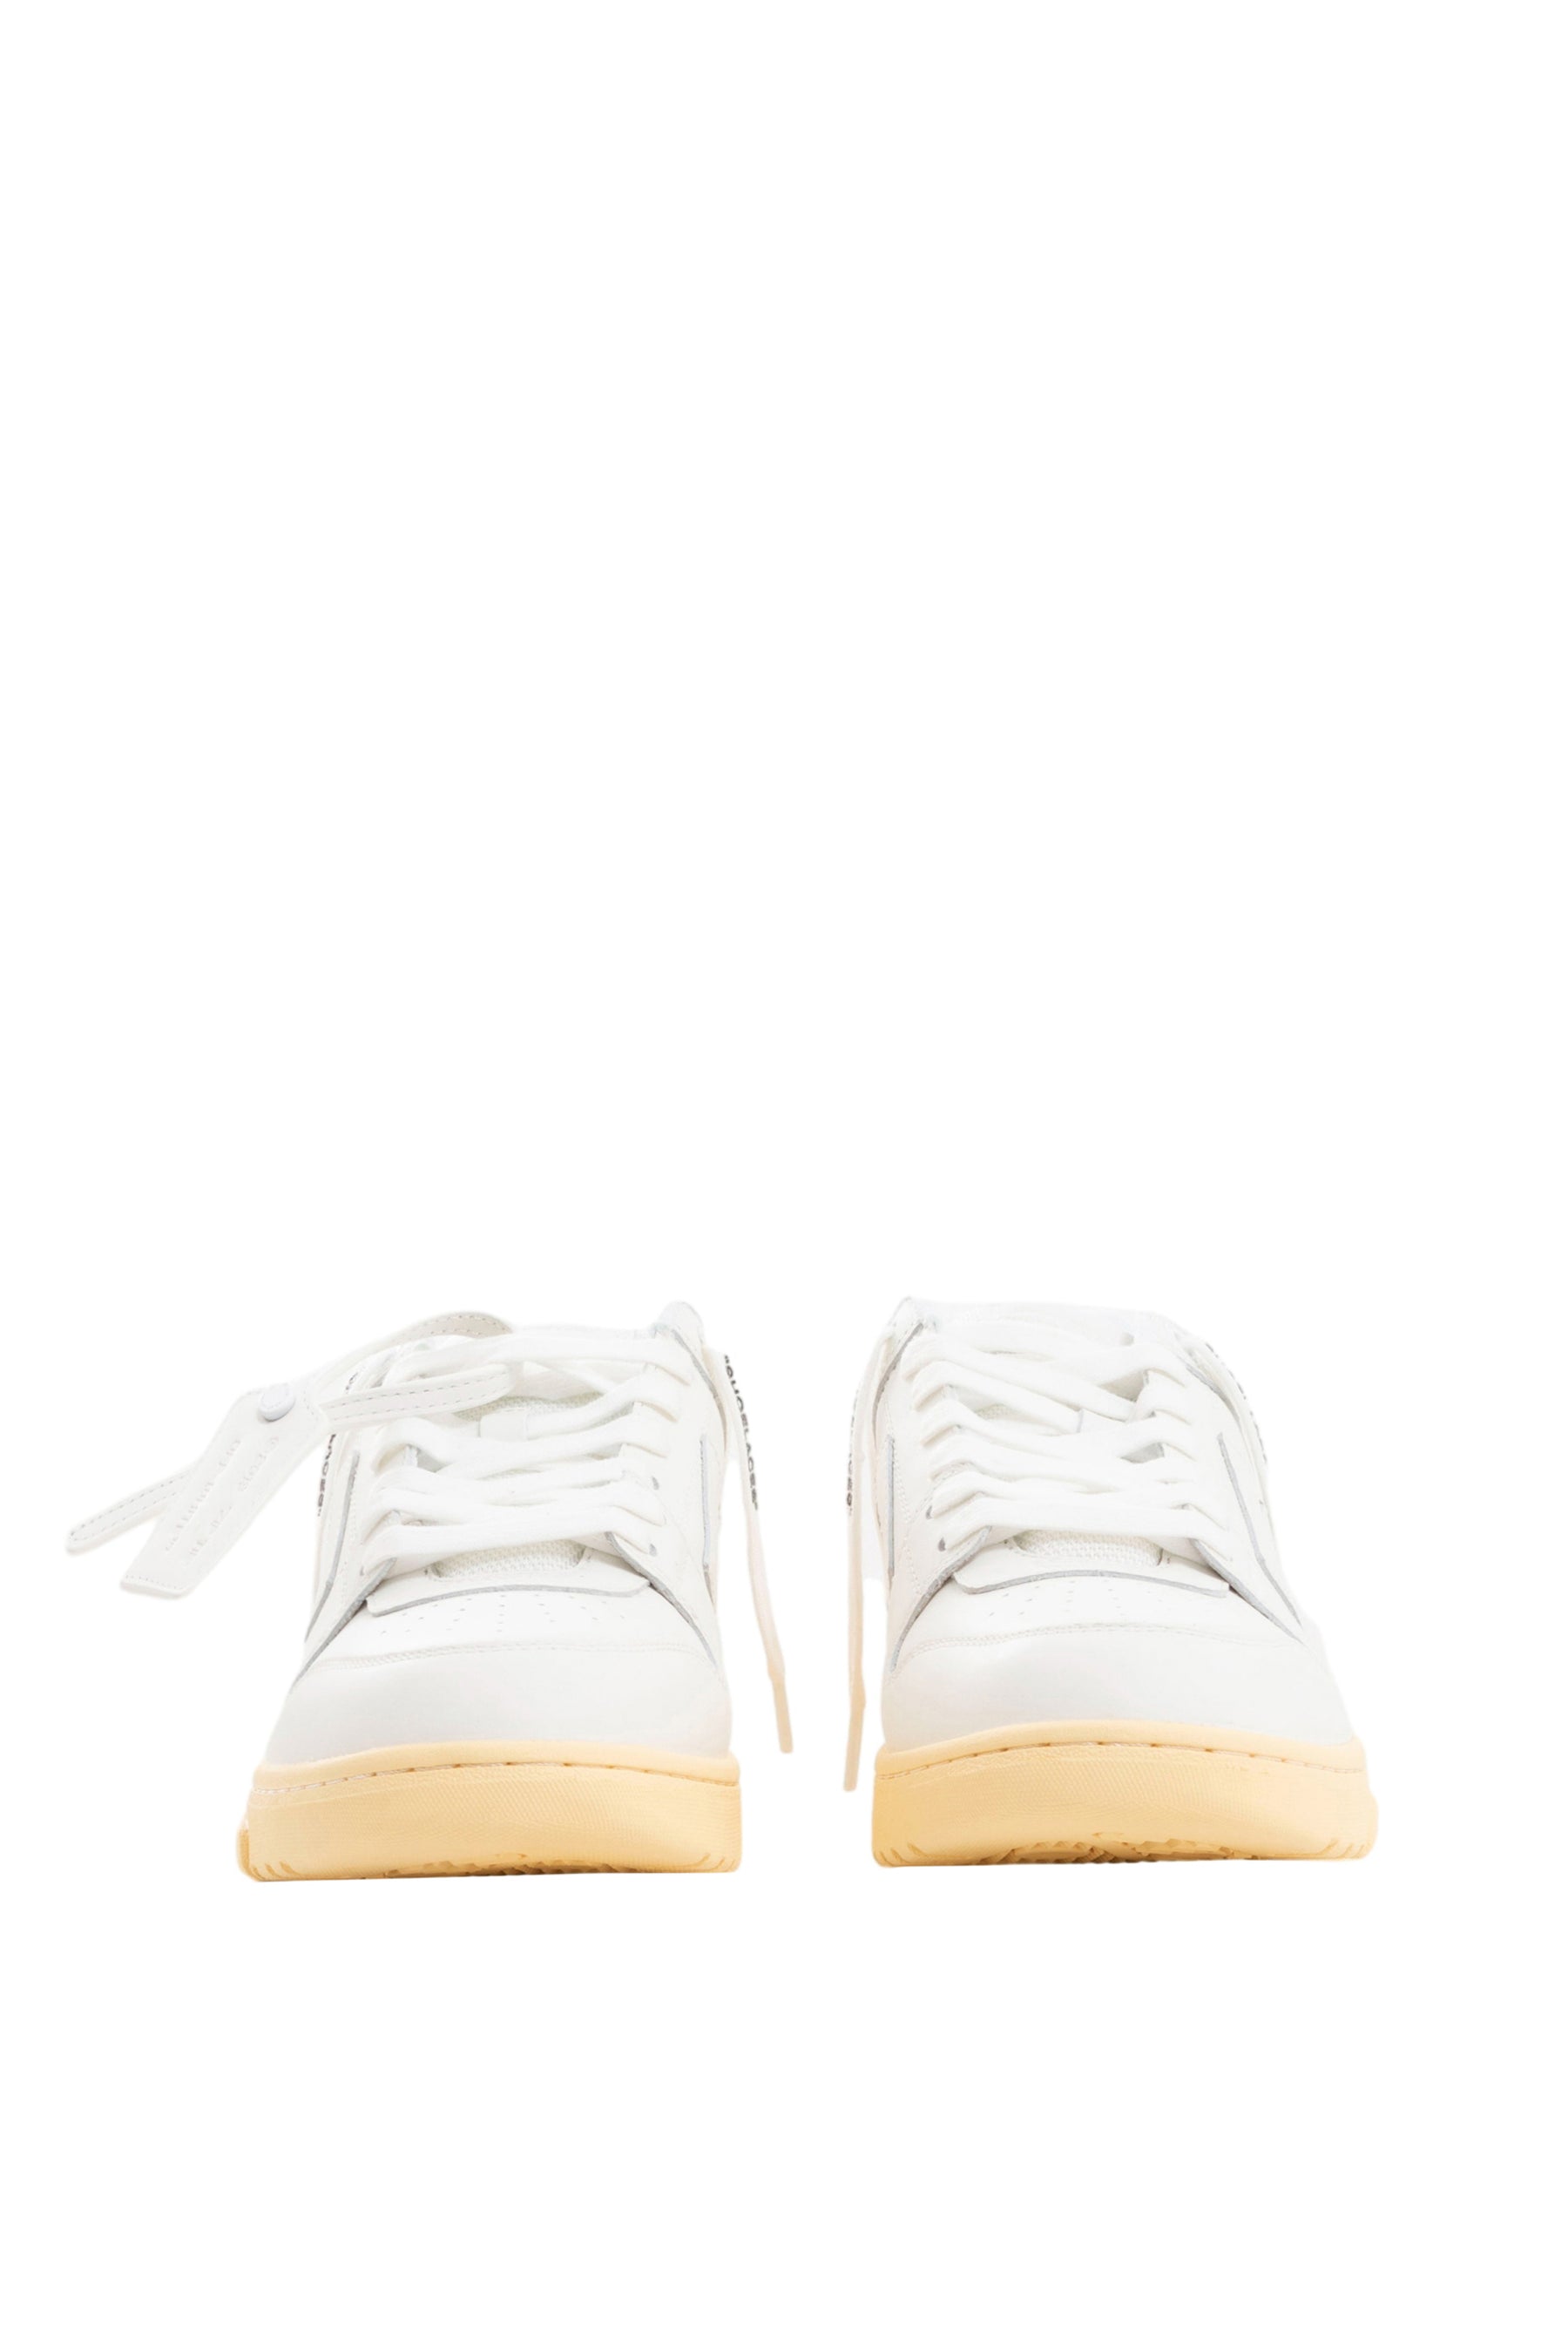 OUT OF OFFICE CALF LEATHER / WHT WHT